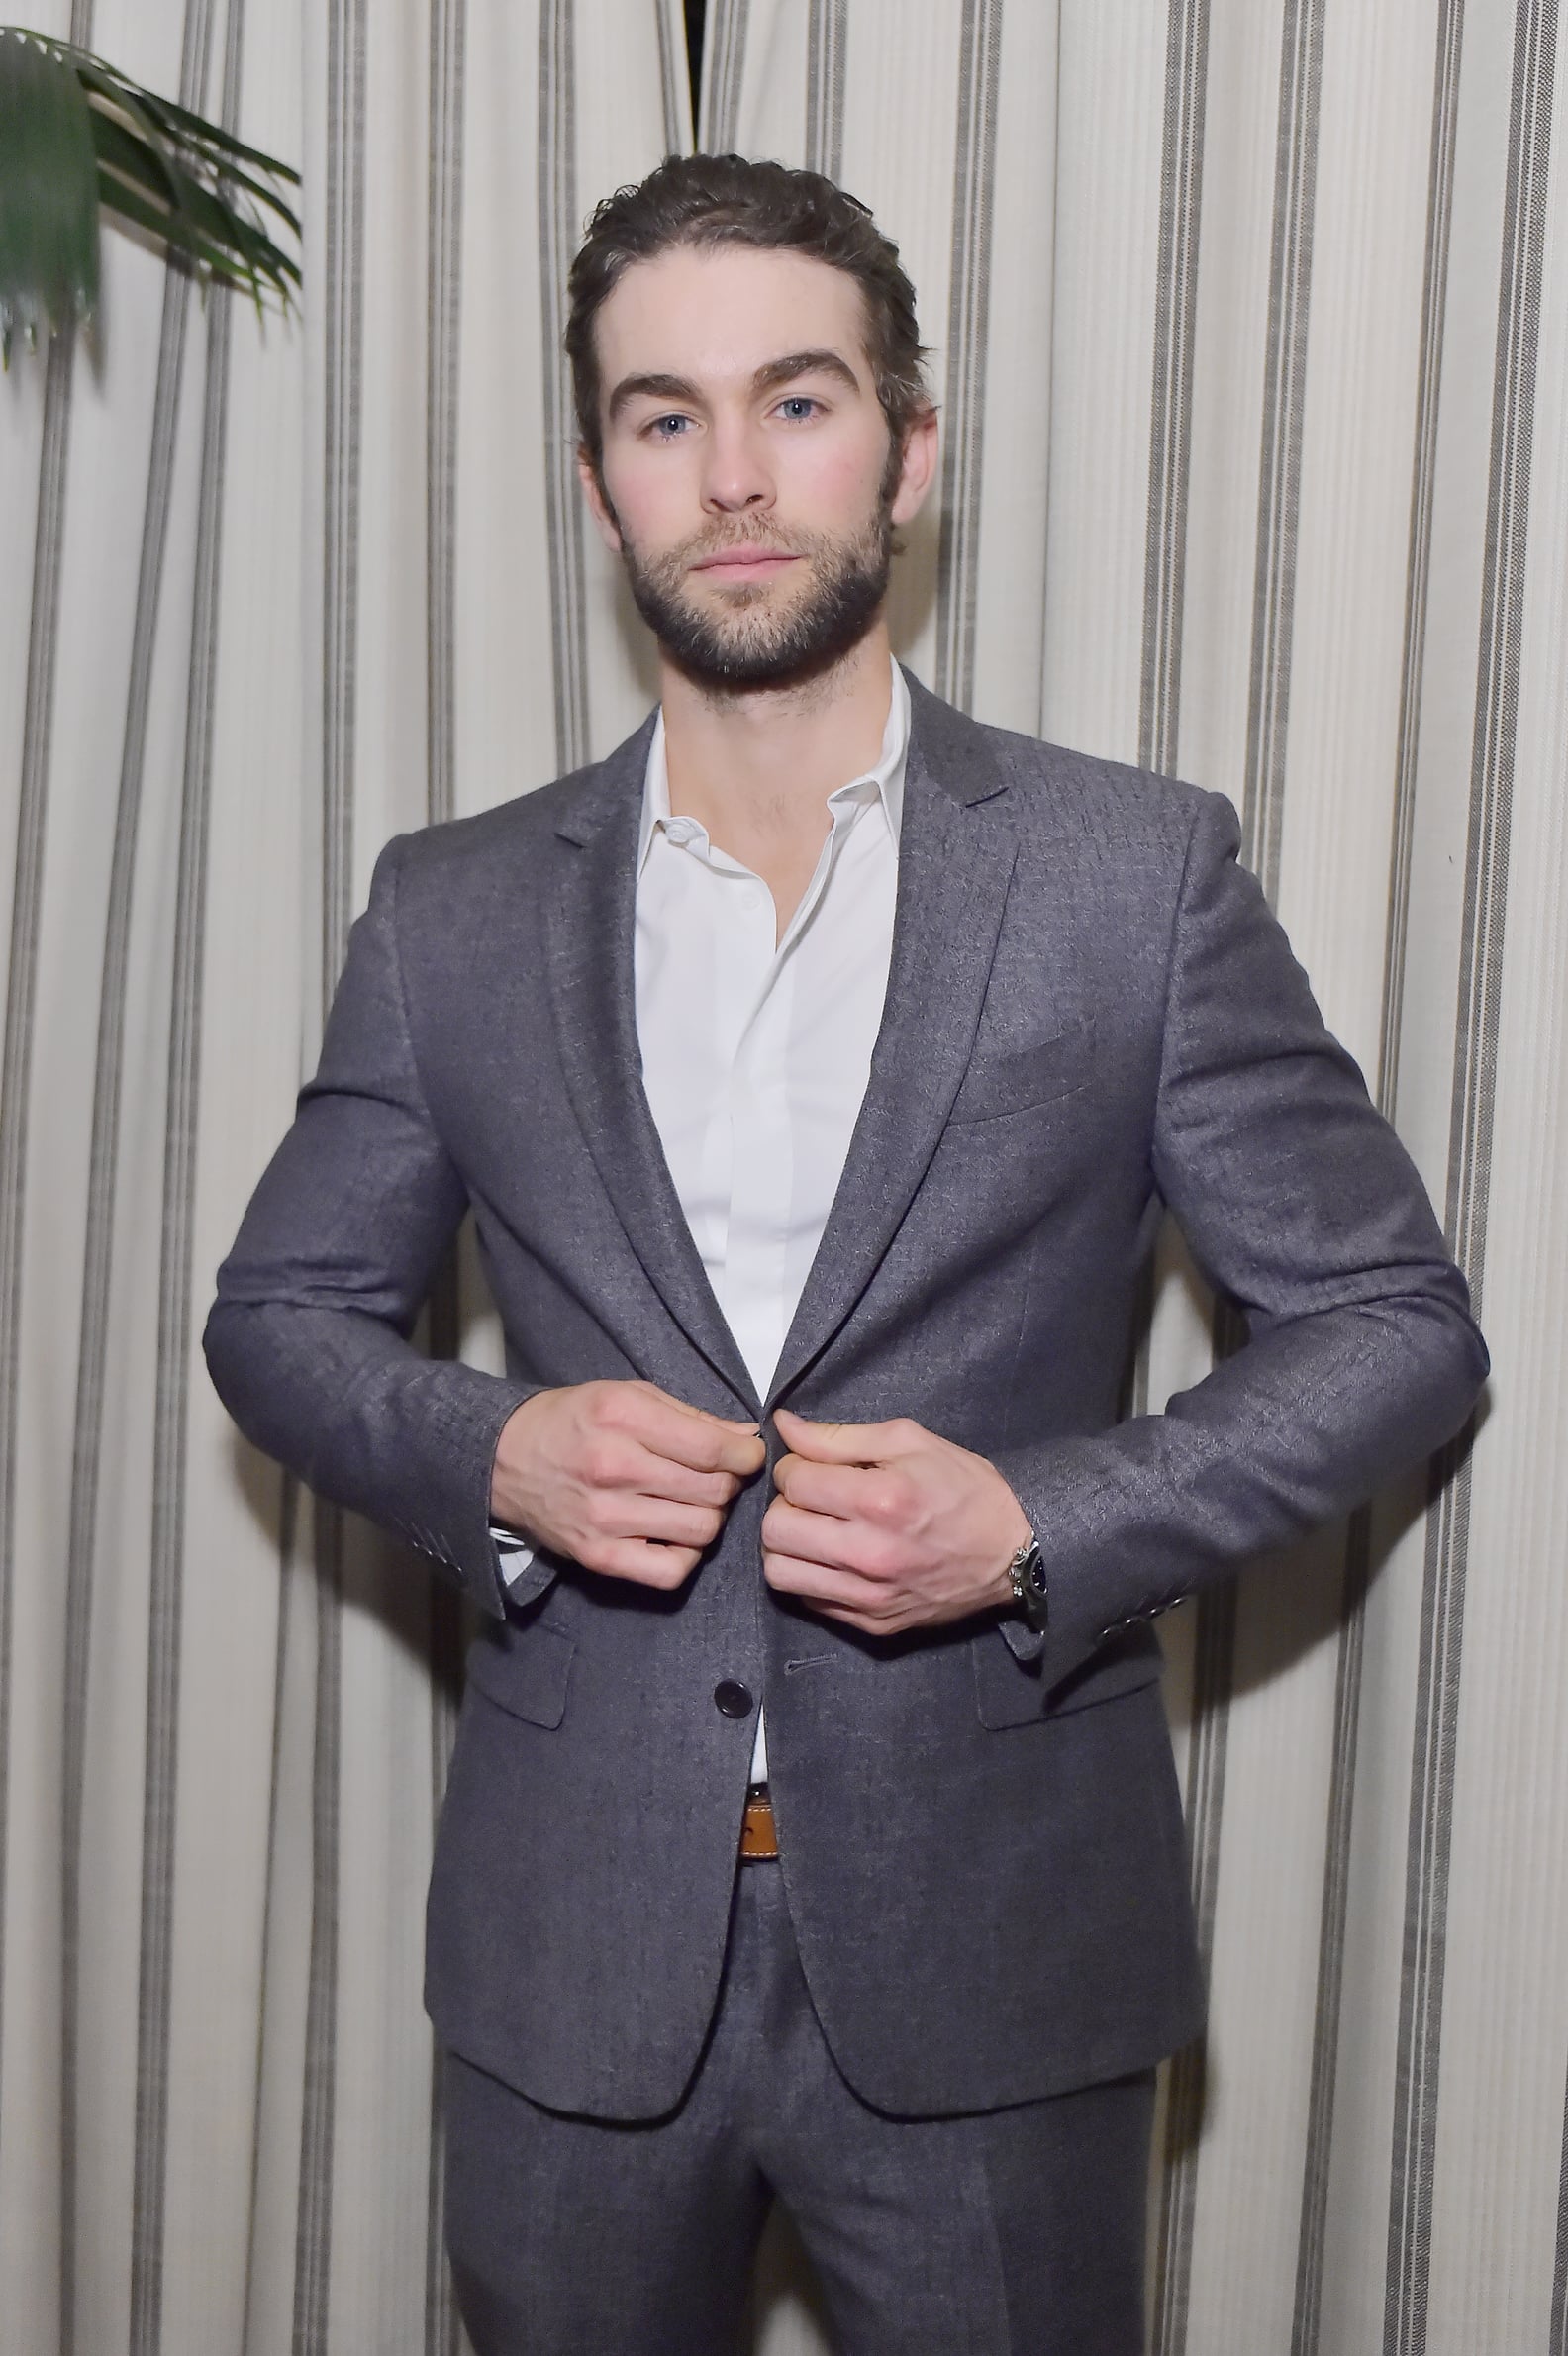 Sexy Chace Crawford Pictures Popsugar Celebrity 2026